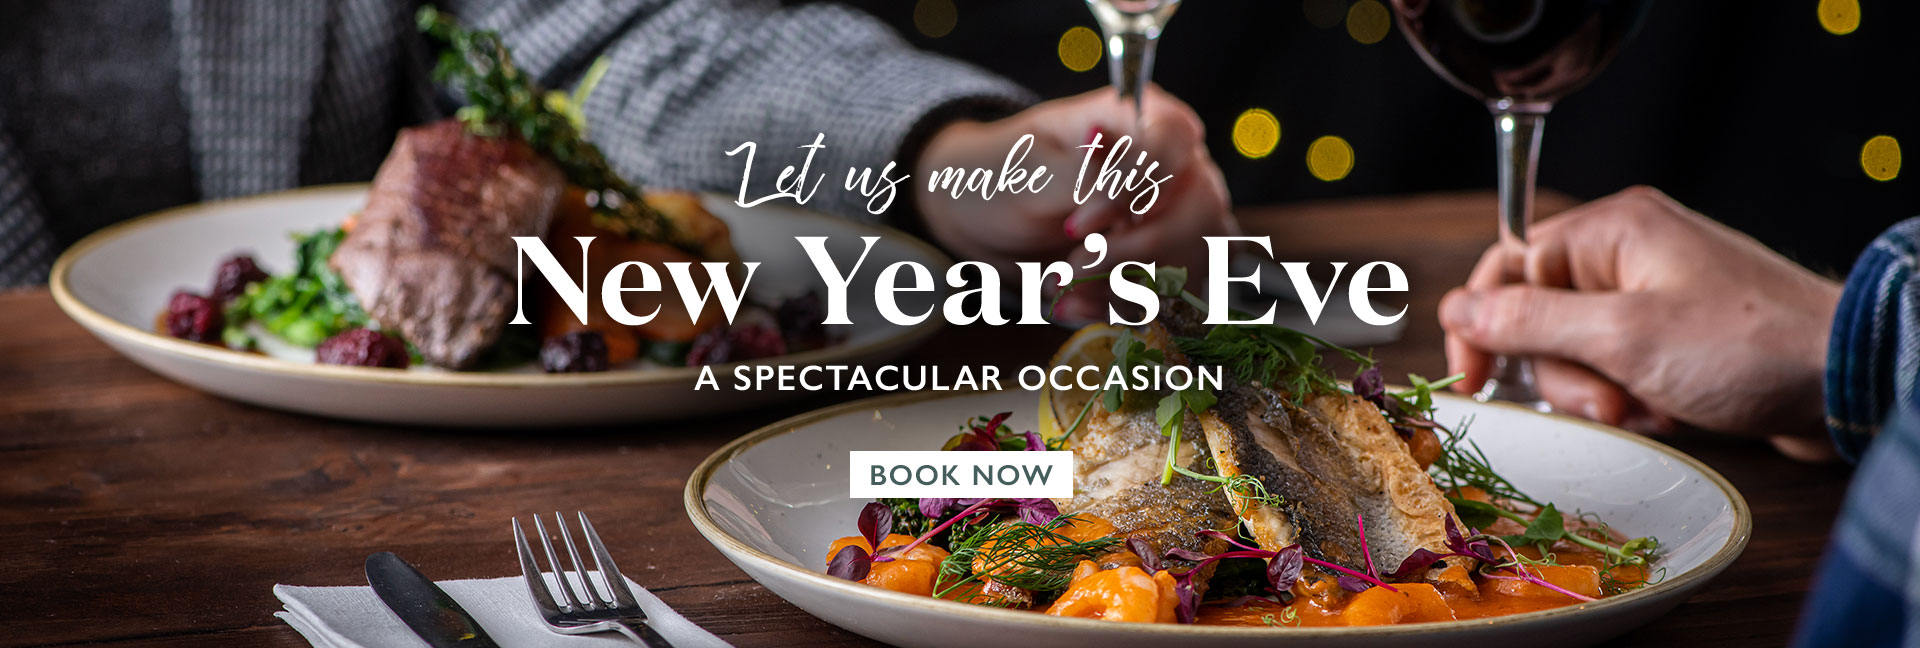 New Year’s Eve Menu at The Robin Hood, Clacton-on-Sea 